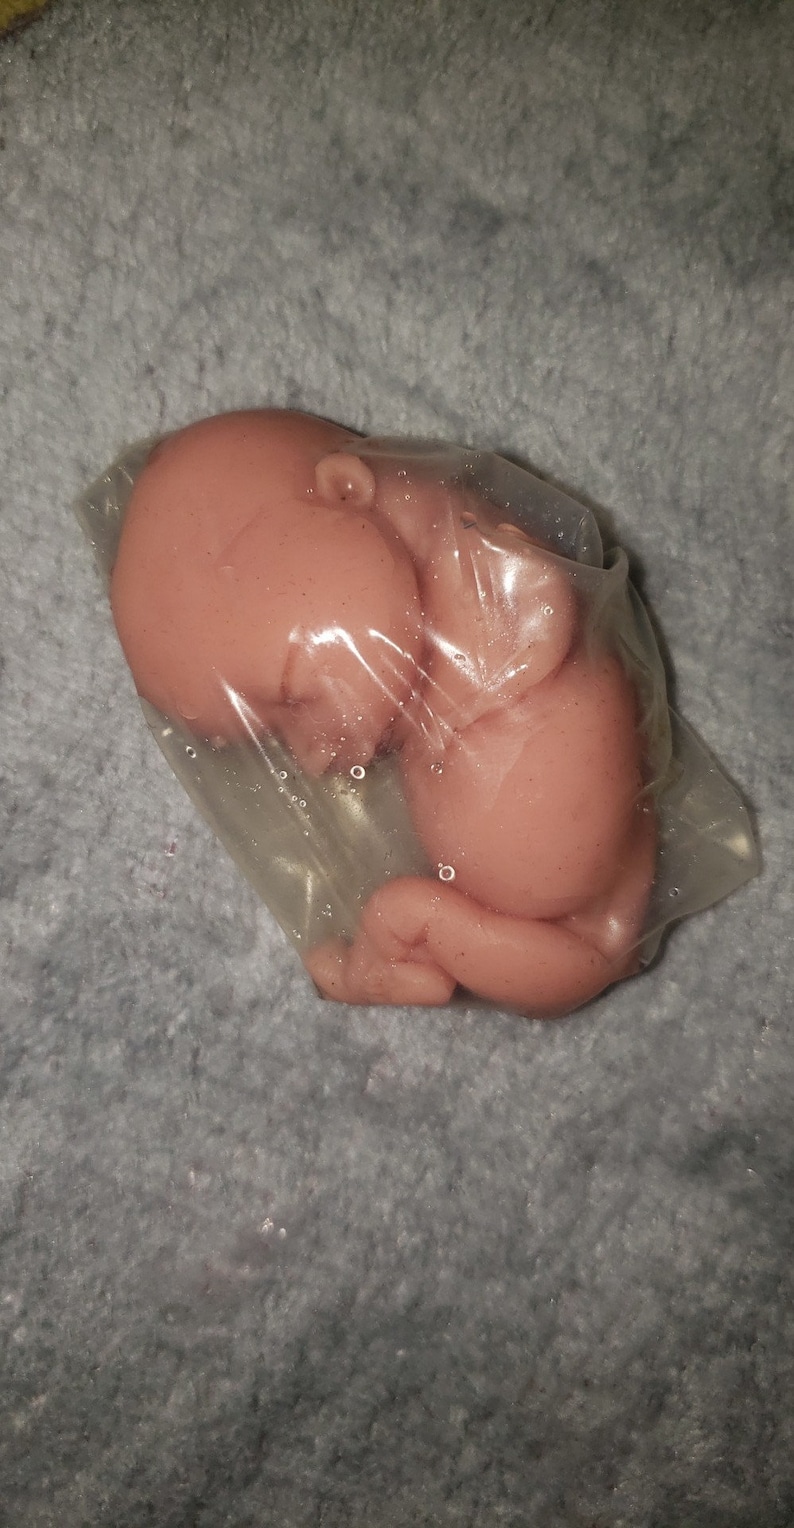 silicone baby fetus memorial baby fetus inside WOMB image 8